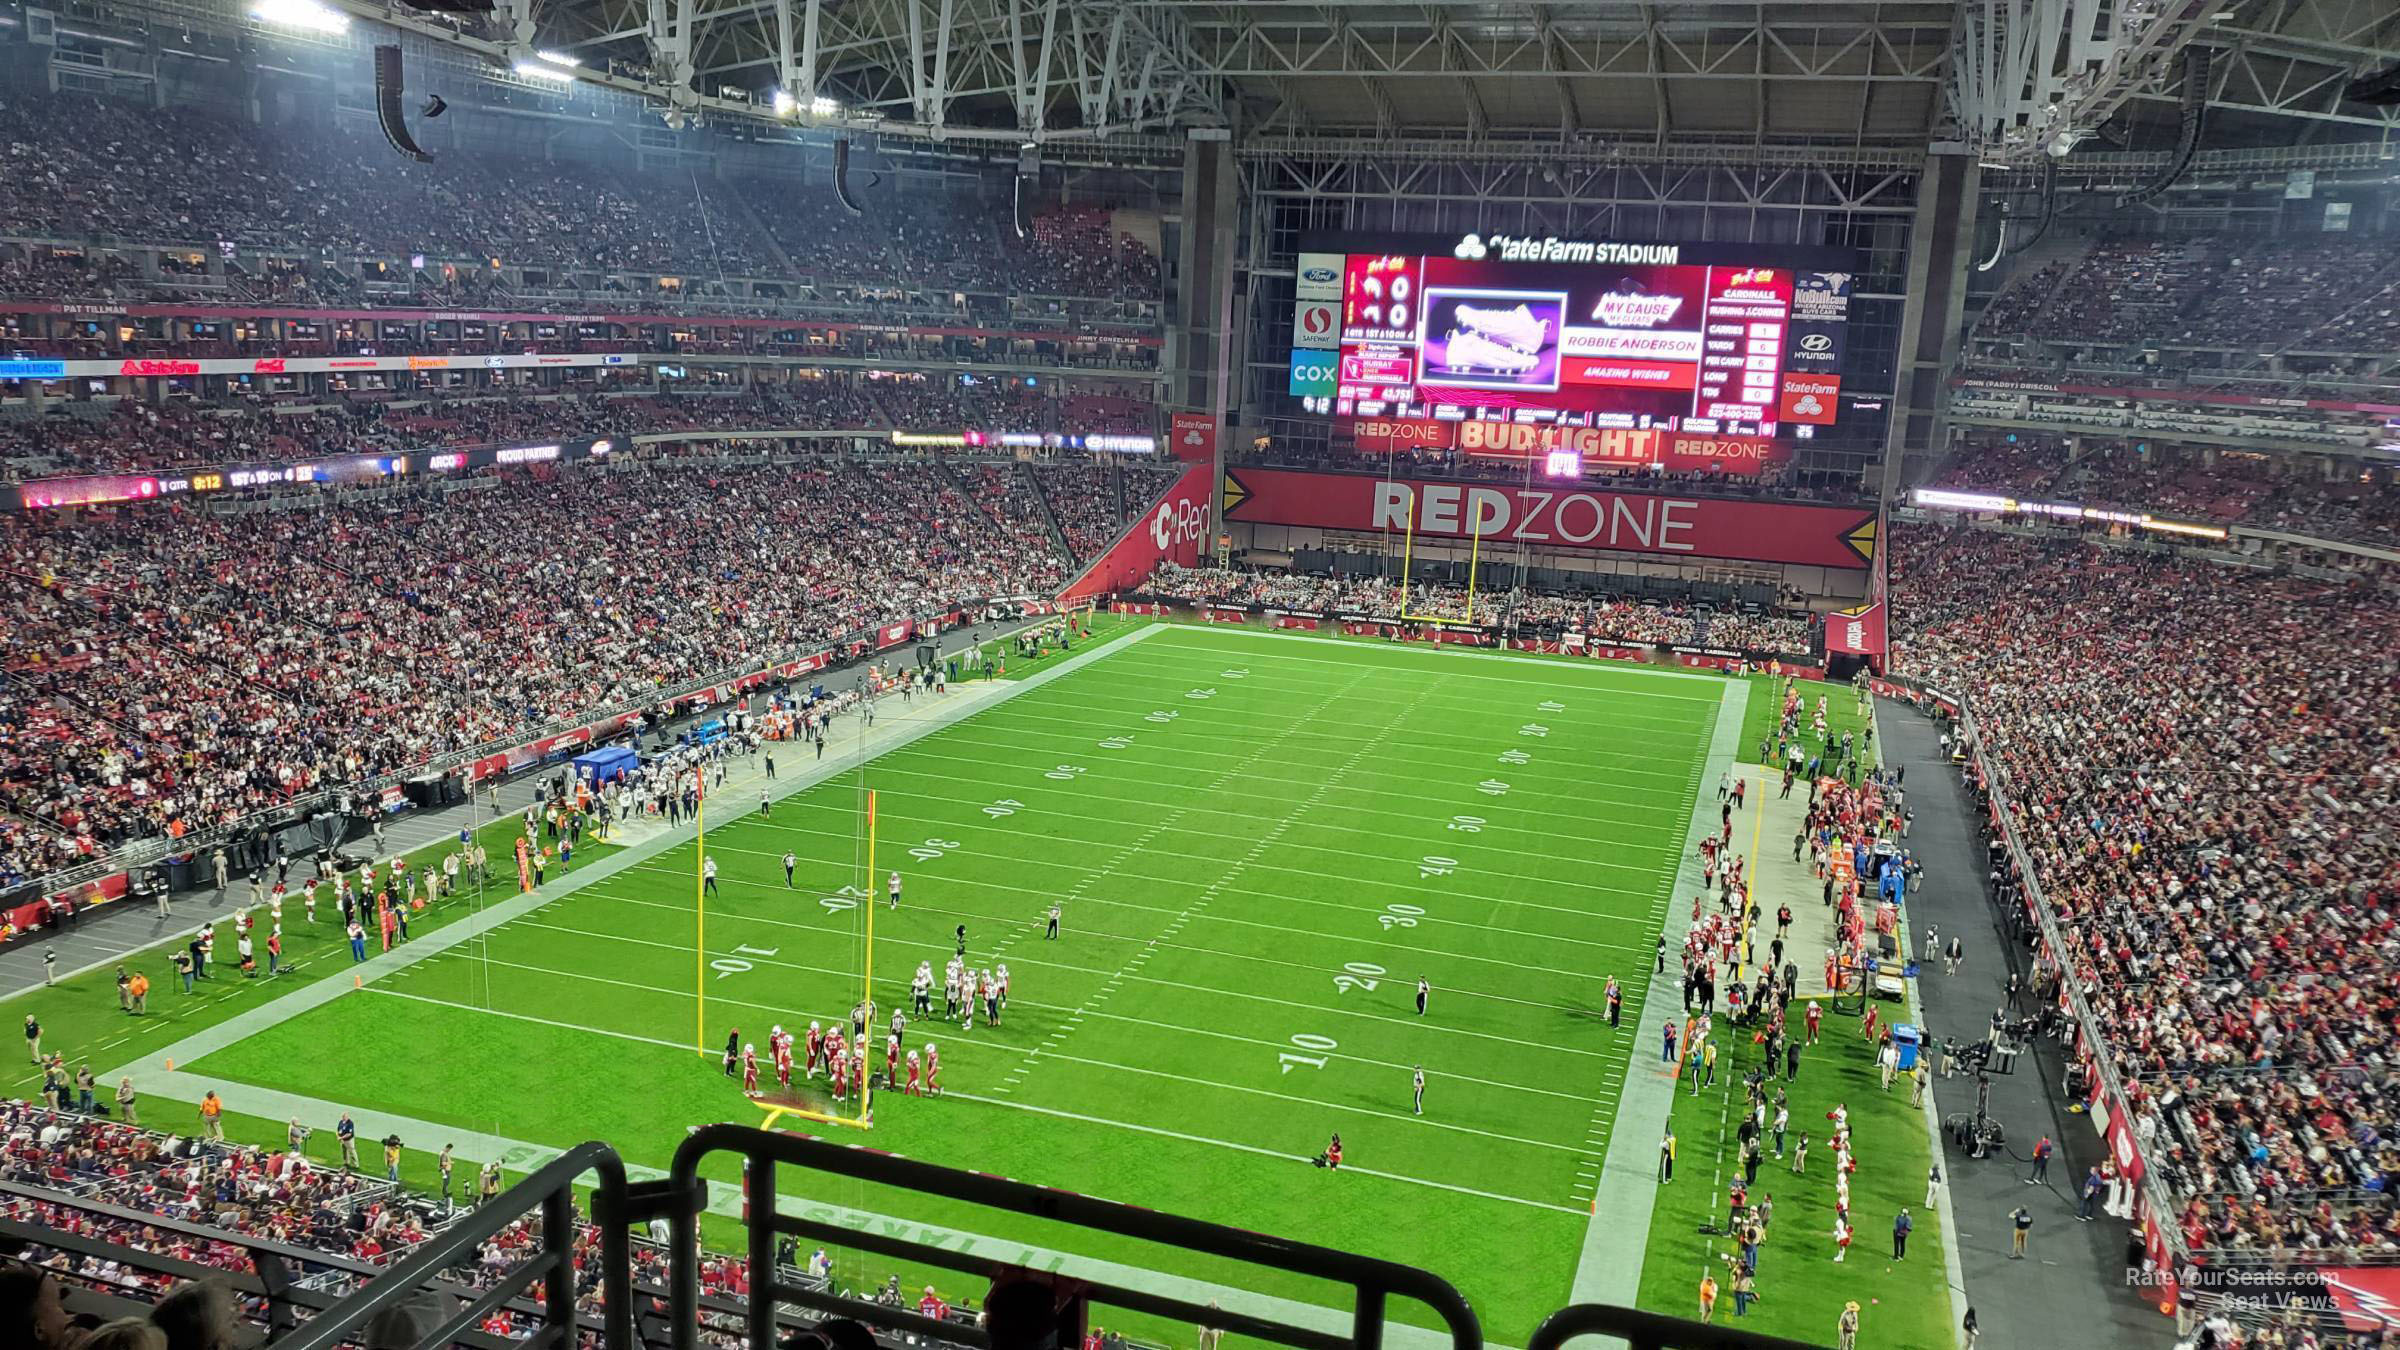 Section 426 at State Farm Stadium